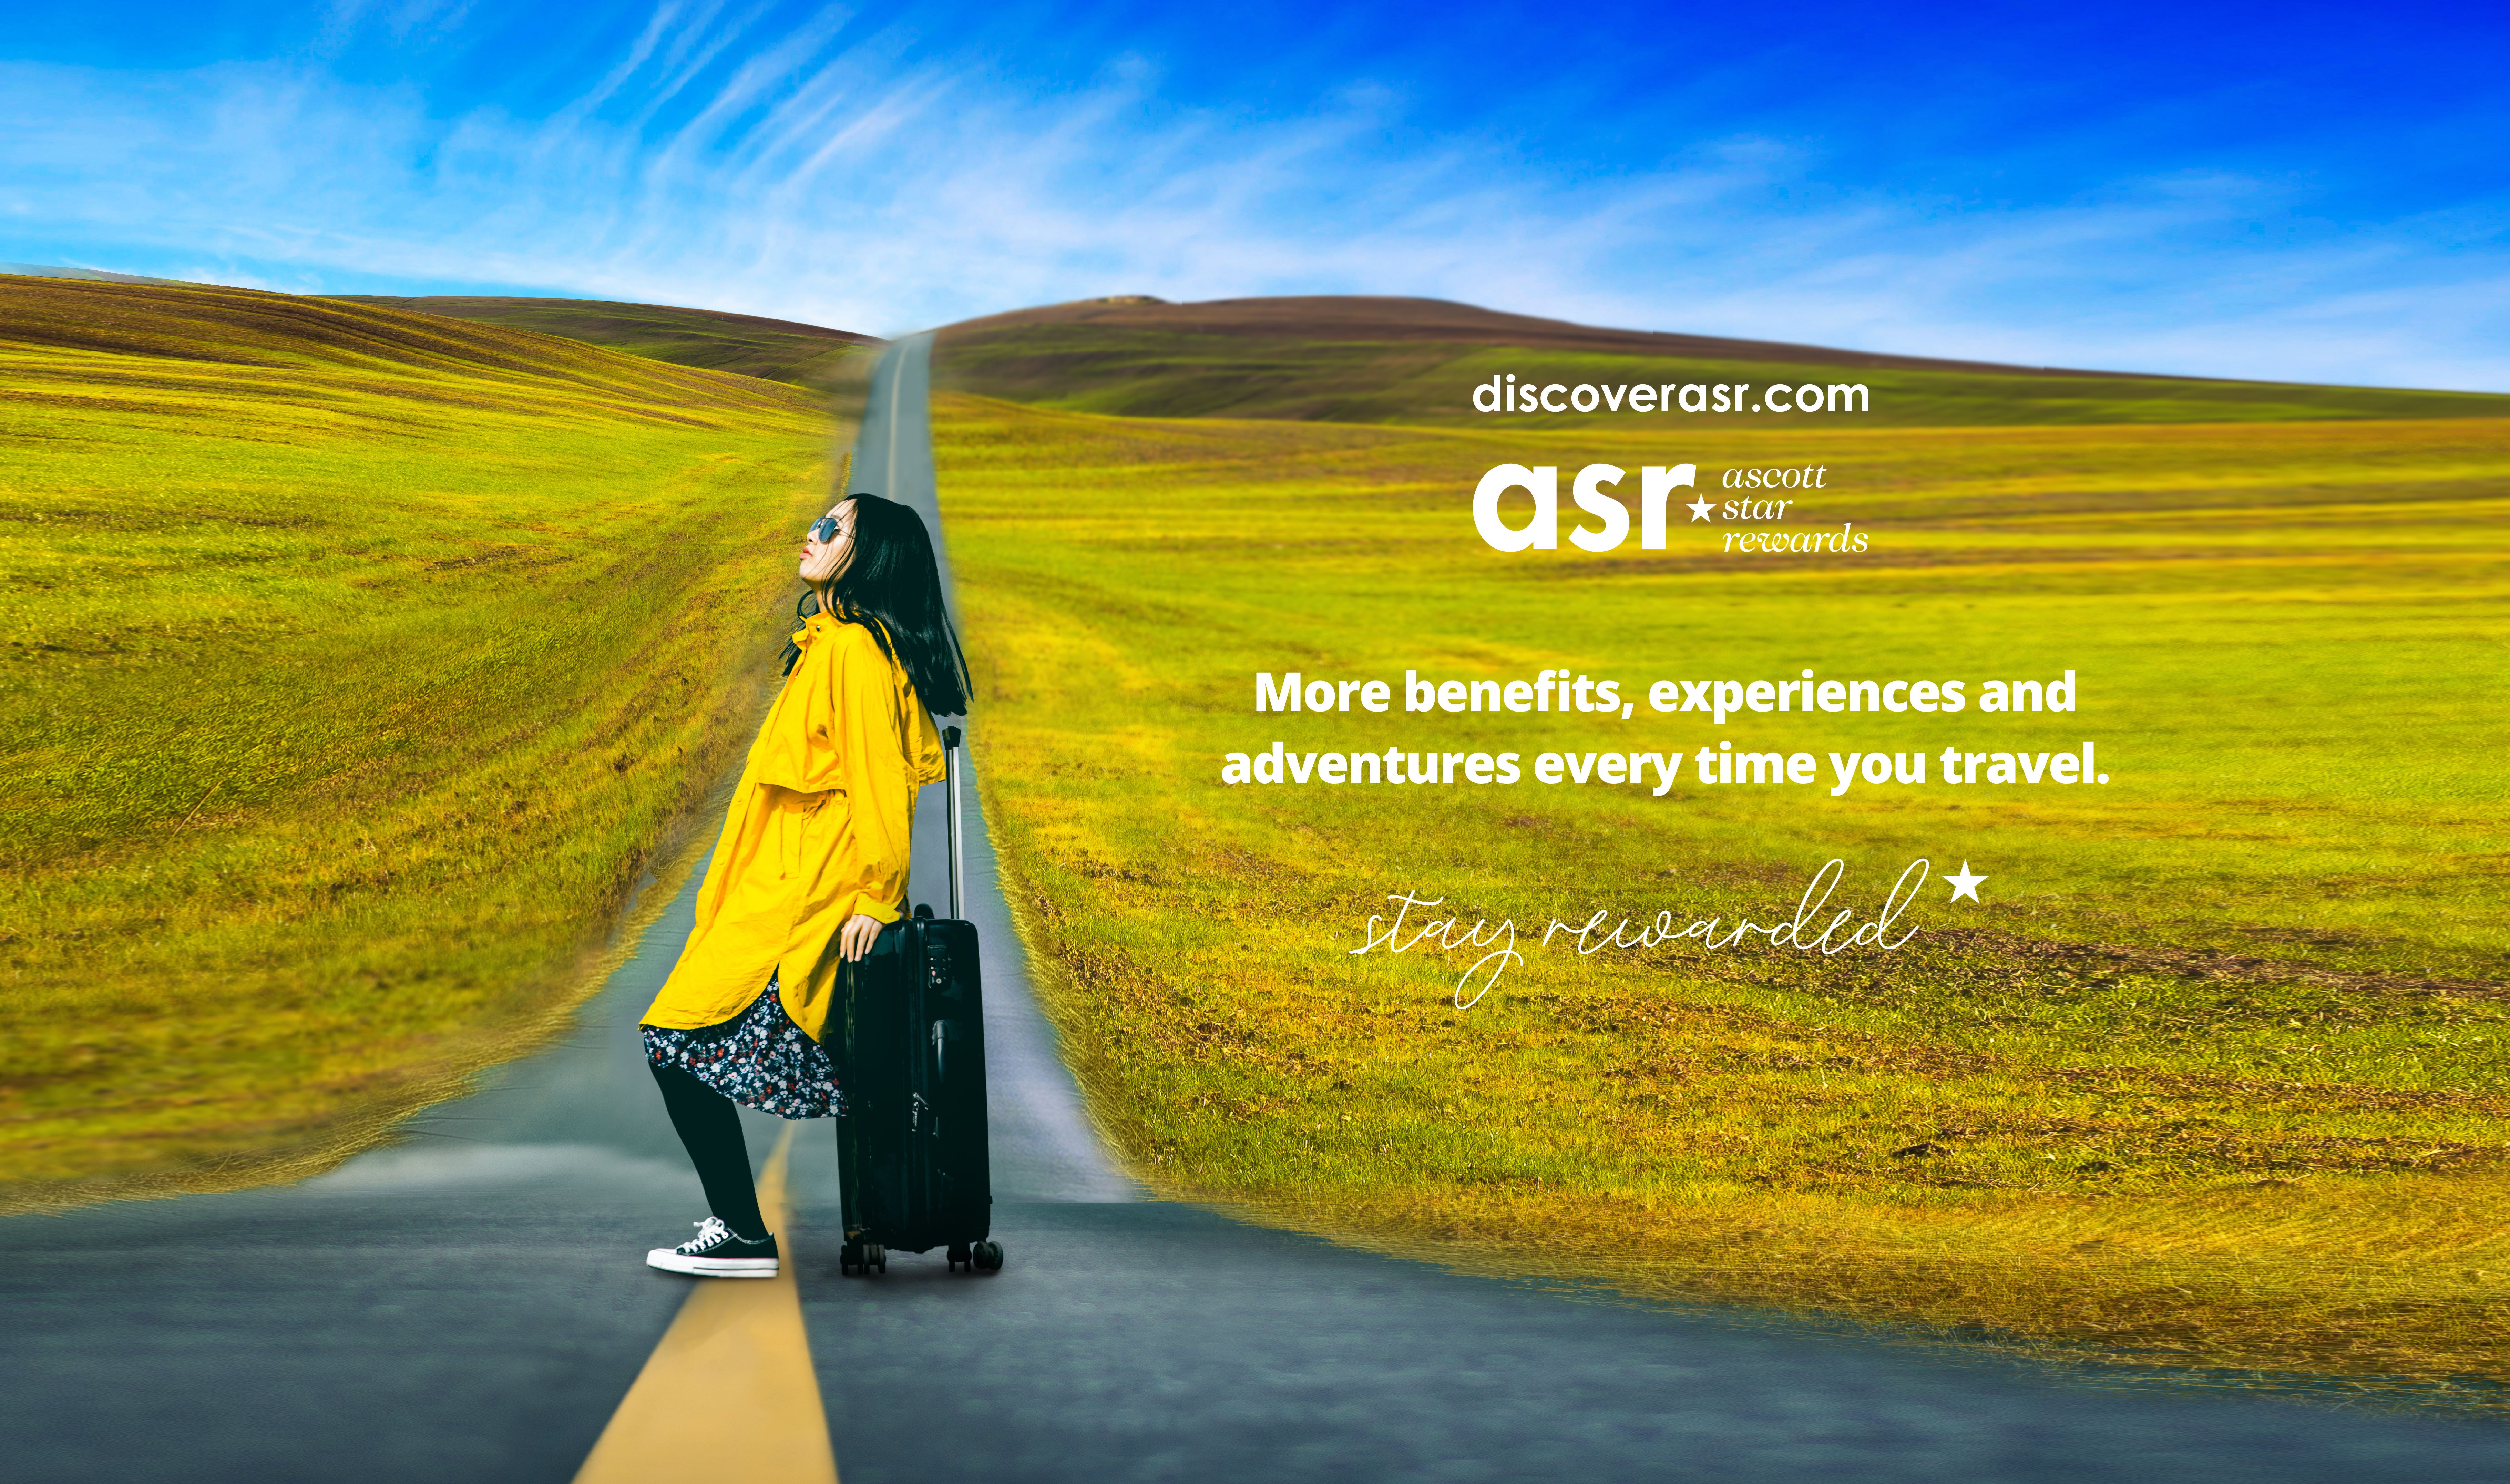 Stay Rewarded with more benefits, experiences and adventures every time you travel